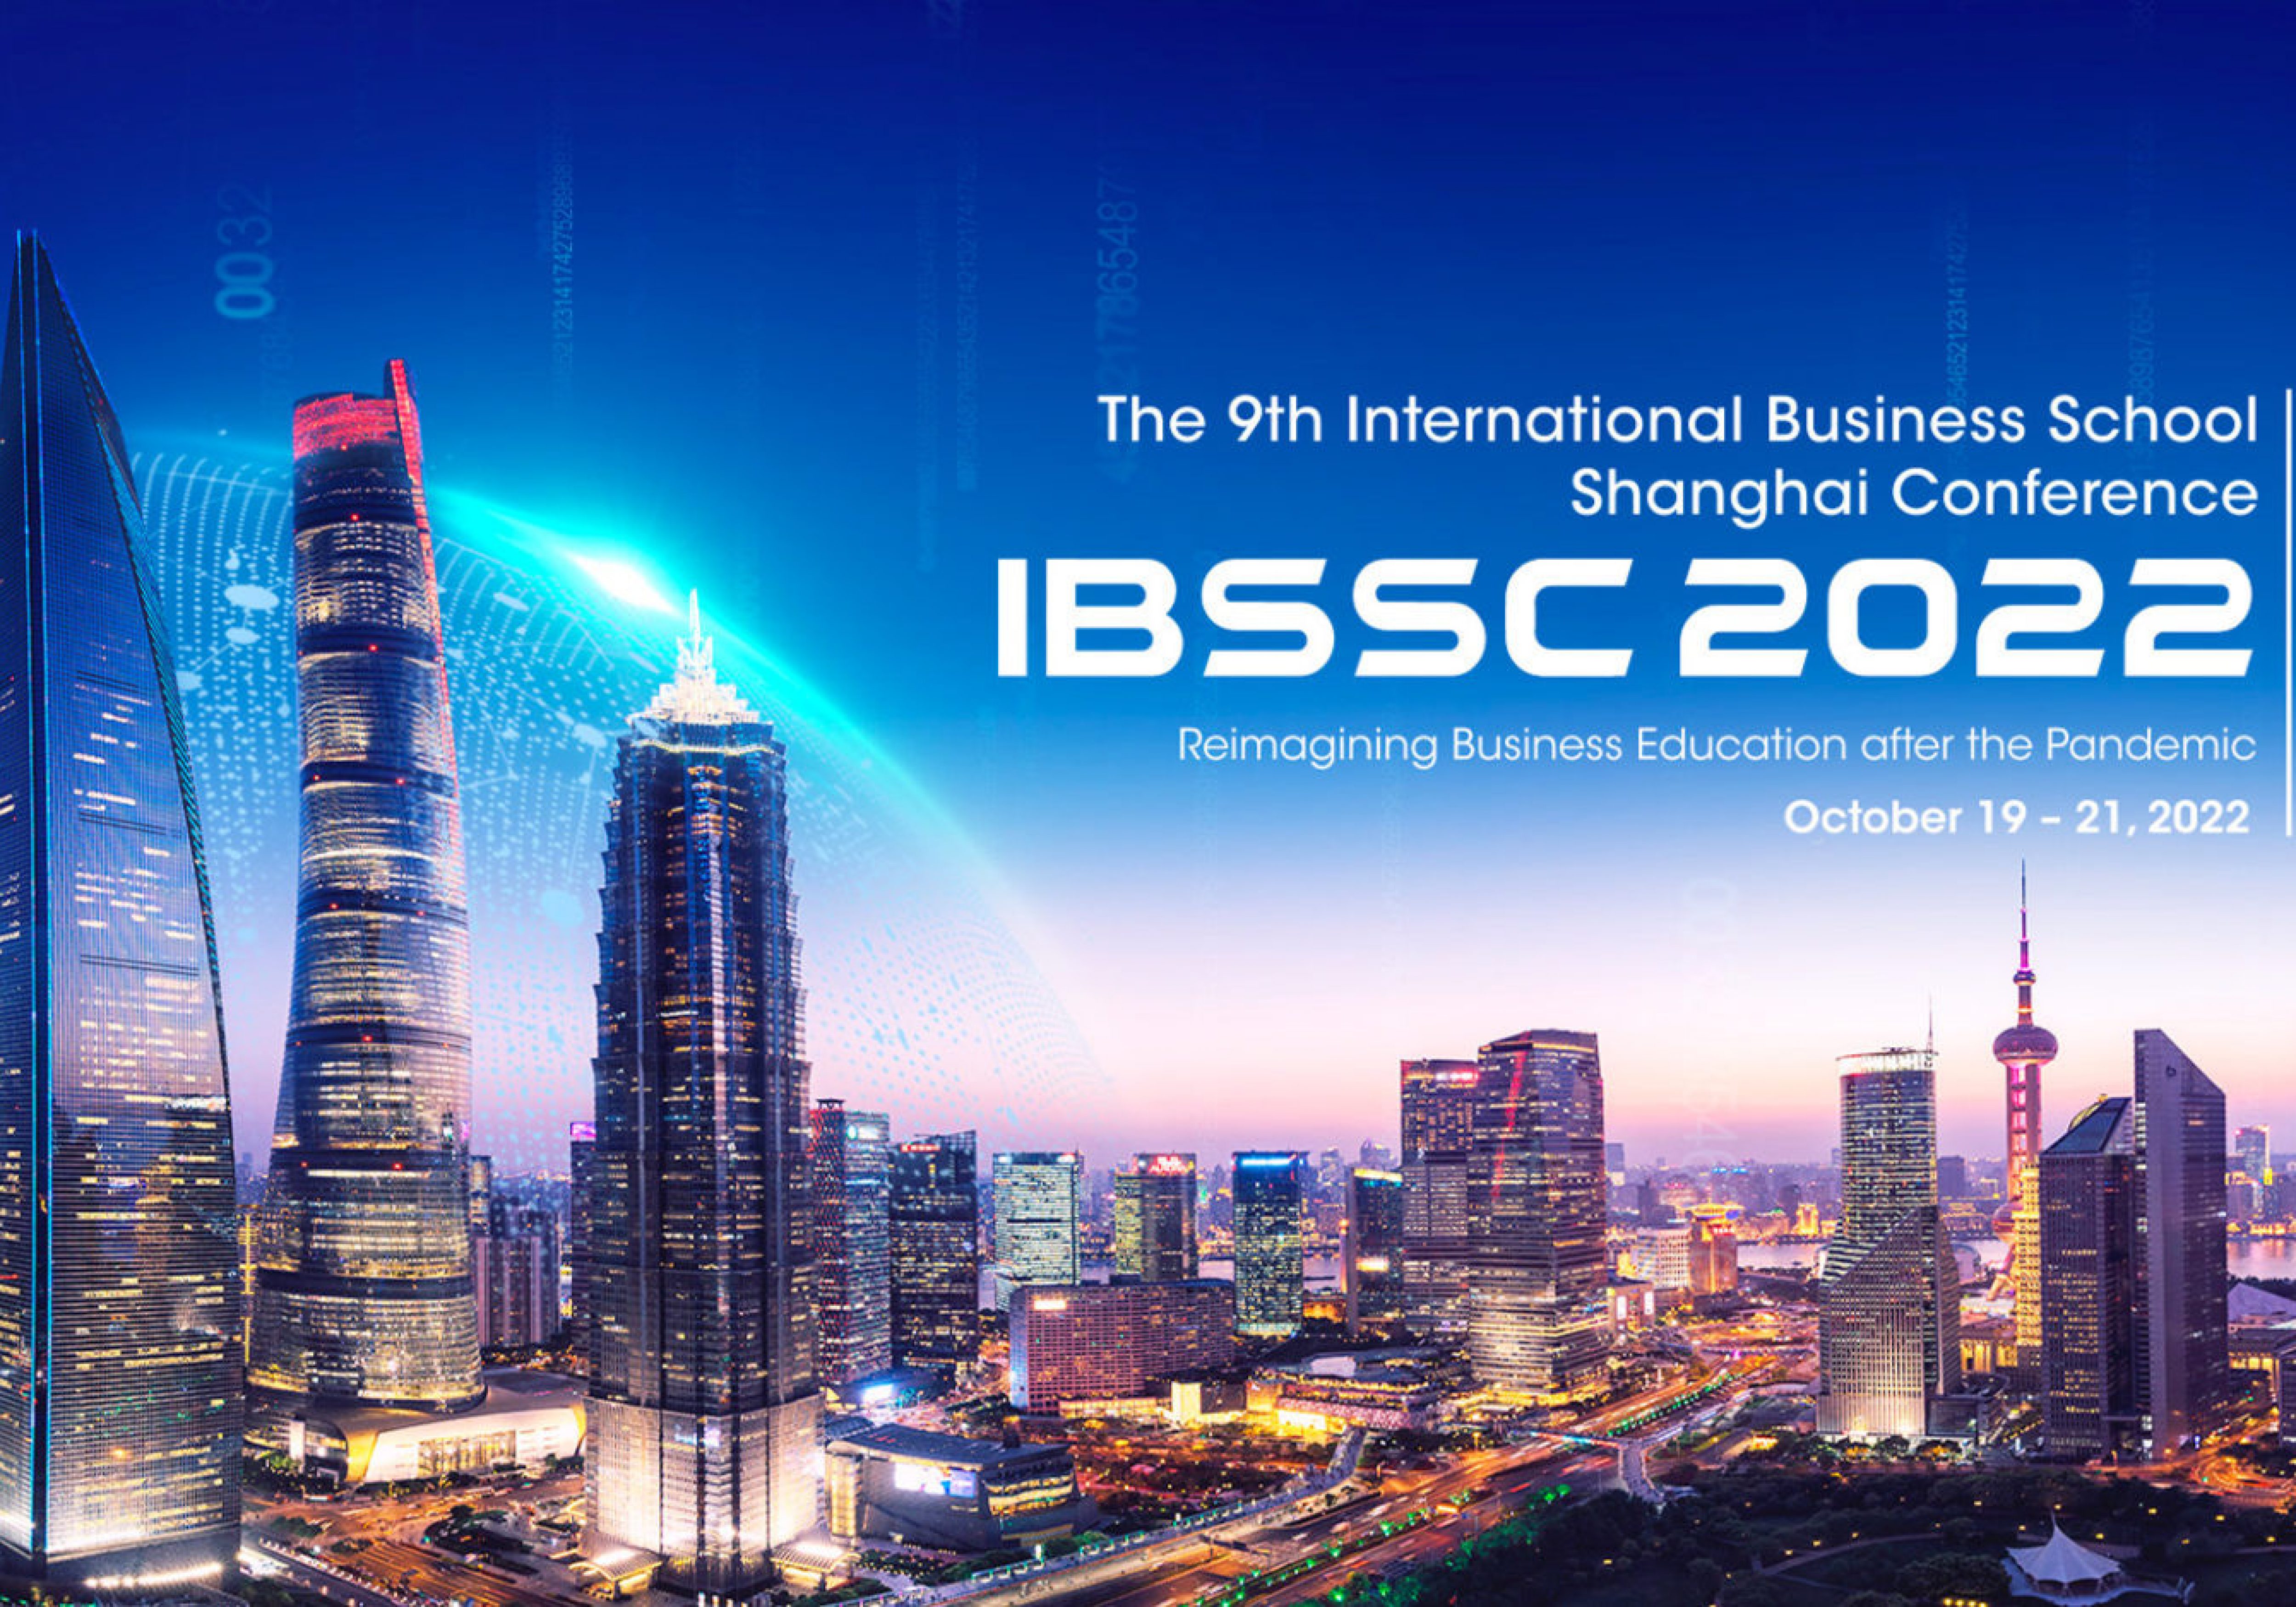 The 9th International Business School Shanghai Conference 2022